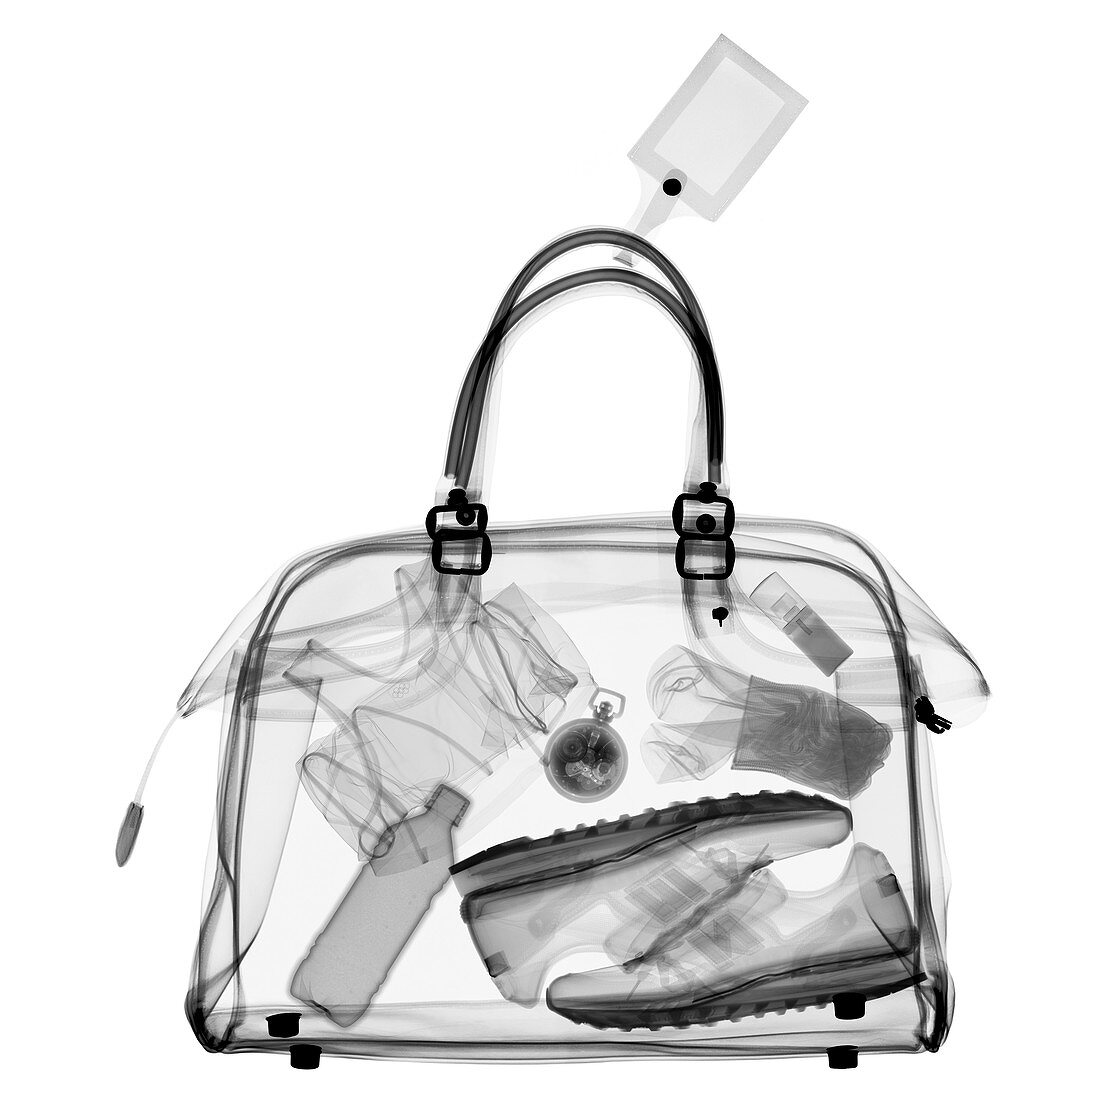 Bag of items, X-ray